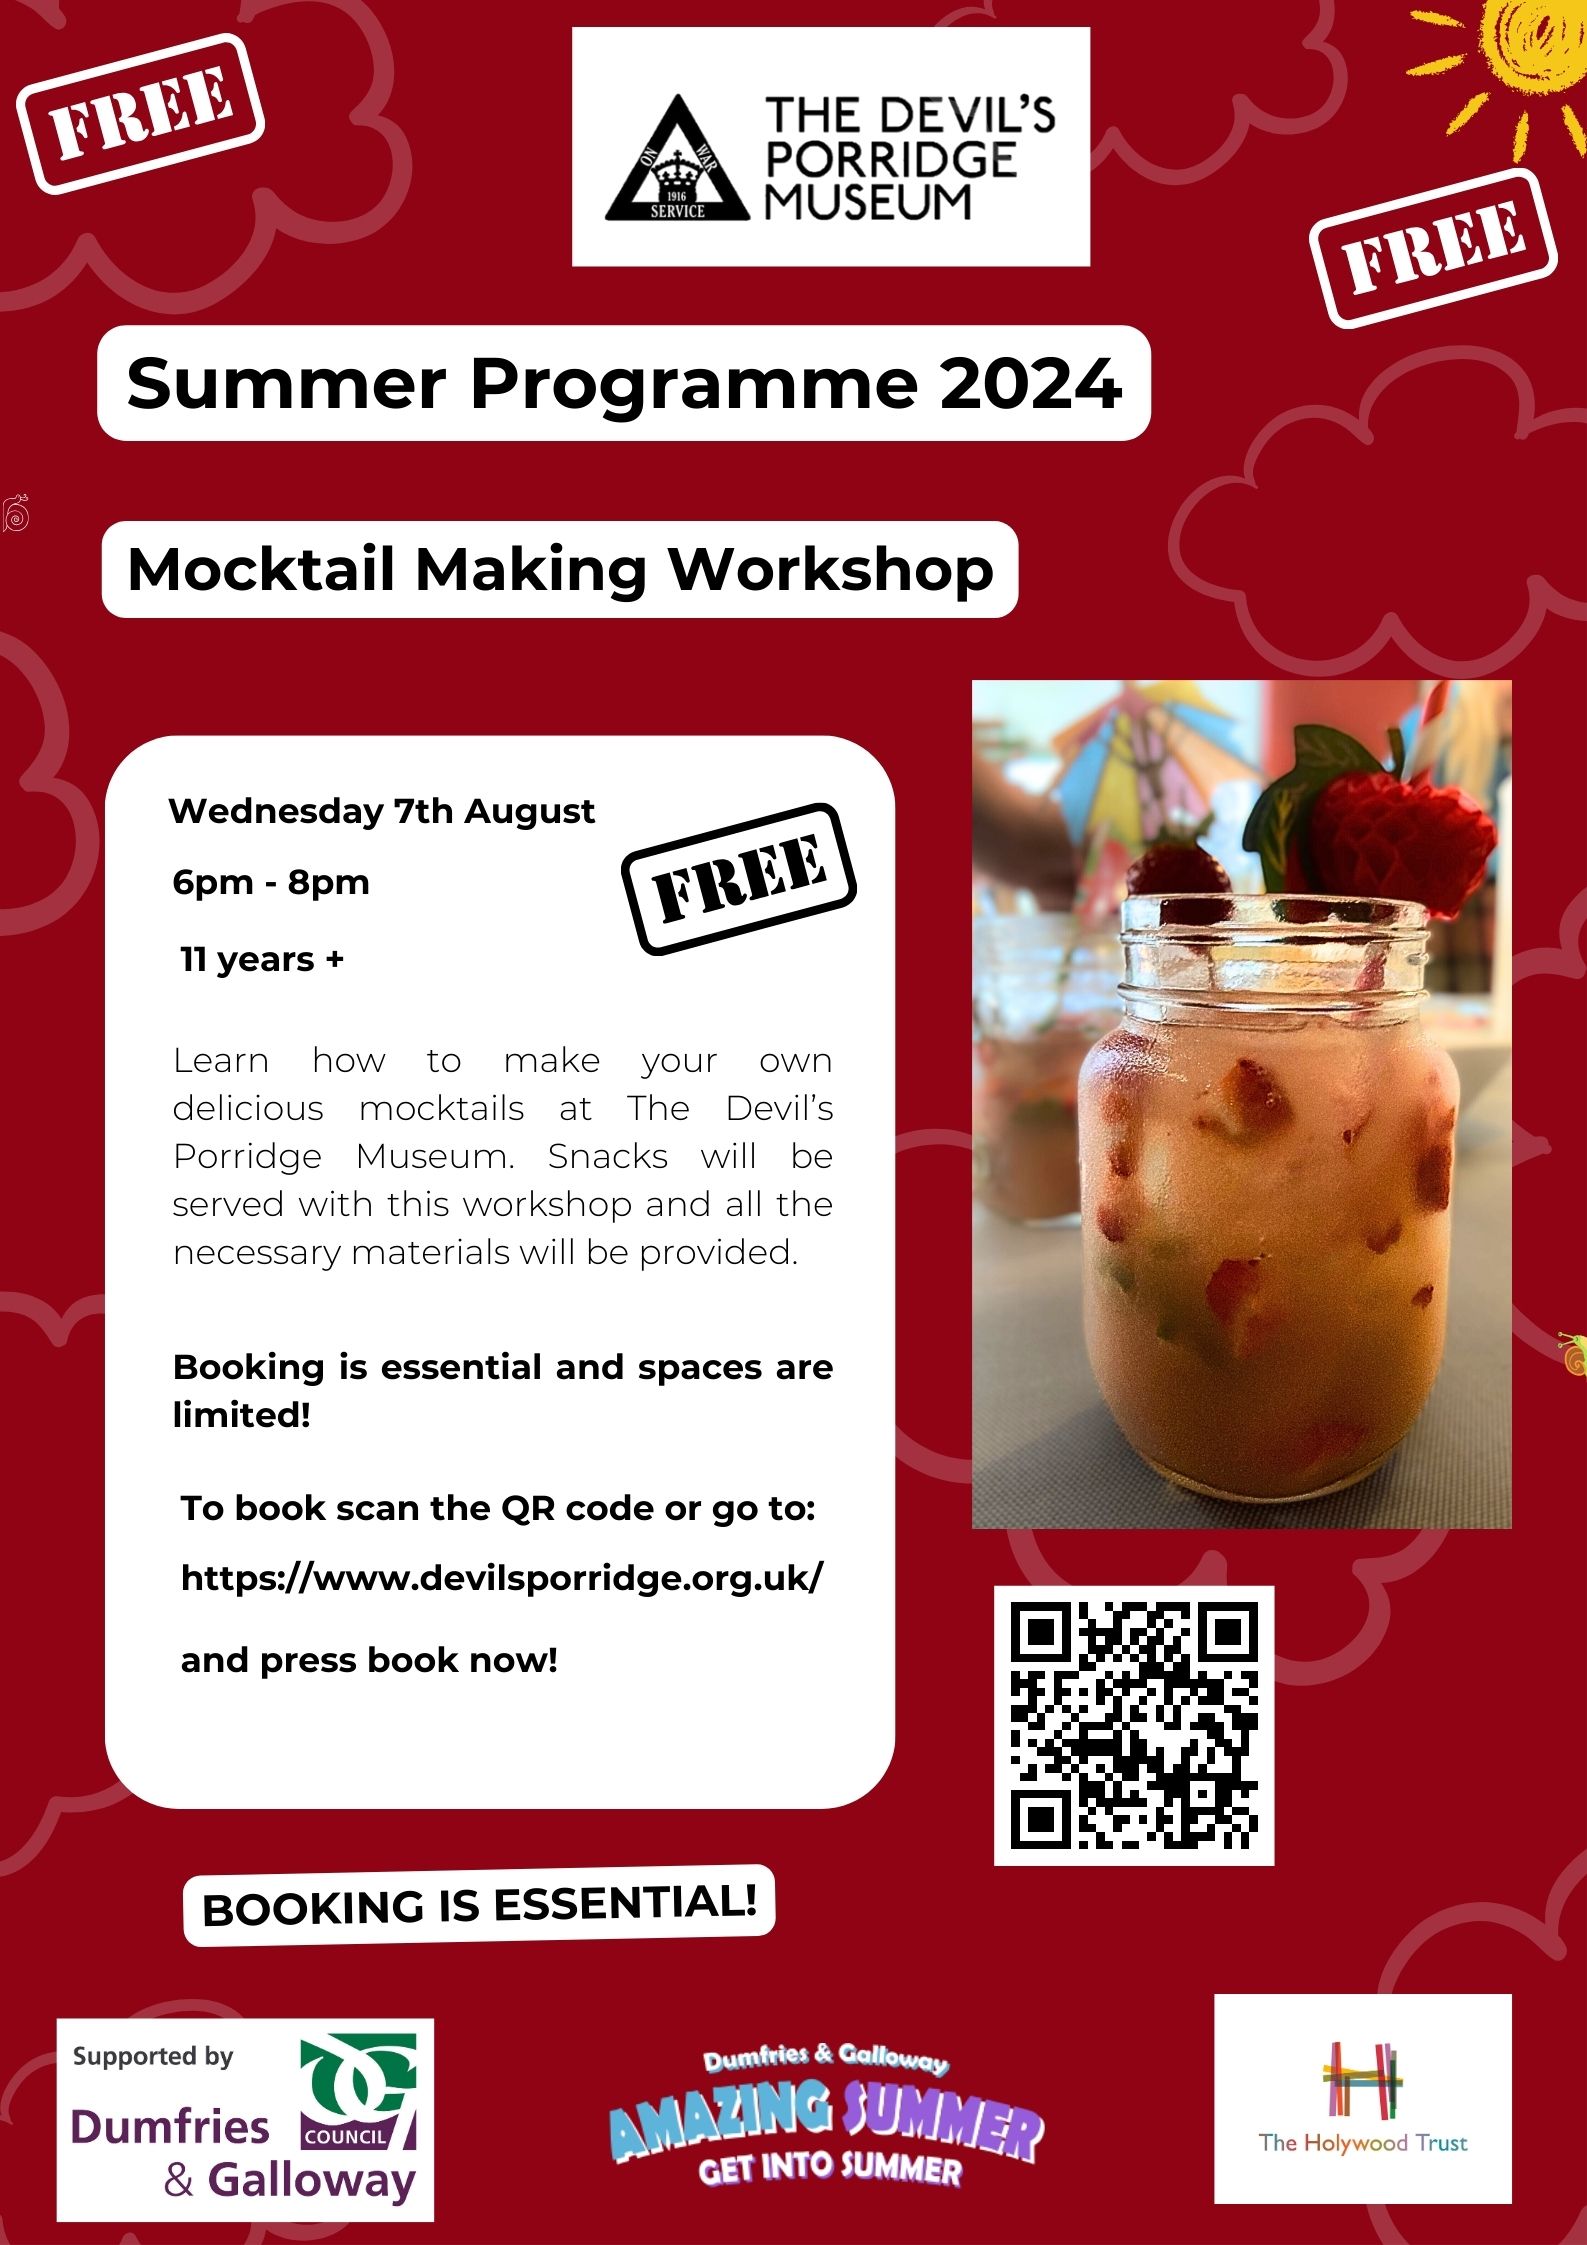 Poster for a Mocktail Making workshop at The Devil's Porridge Museum on Wednesday 7th August 2024.